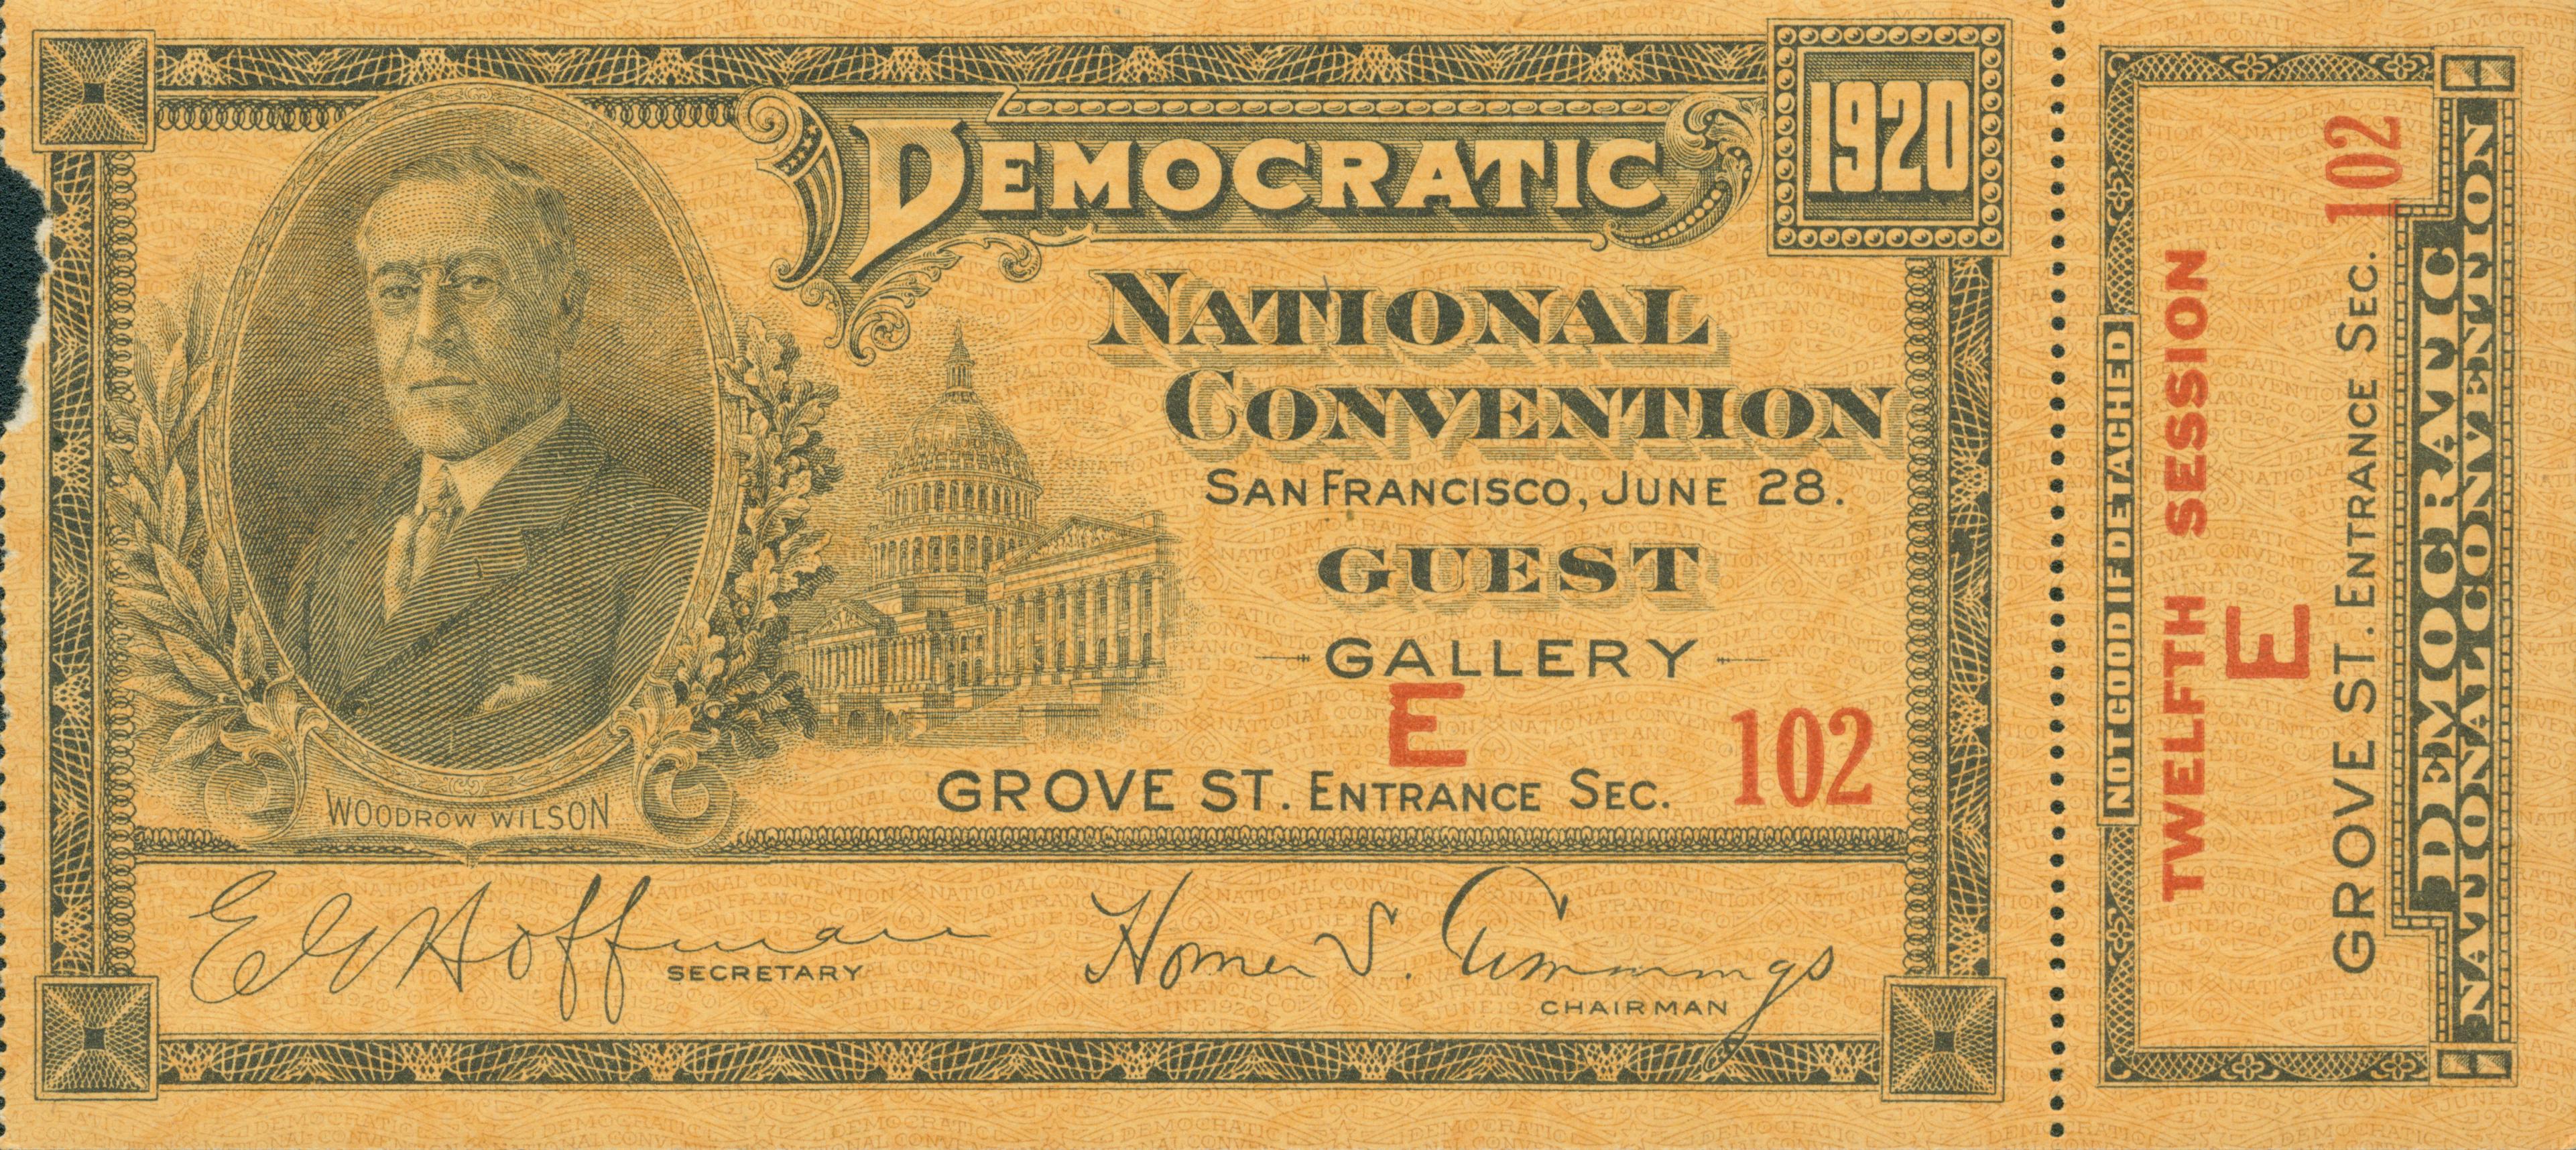 Ticket to the guest Gallery for the 1920 Democratic National Convention